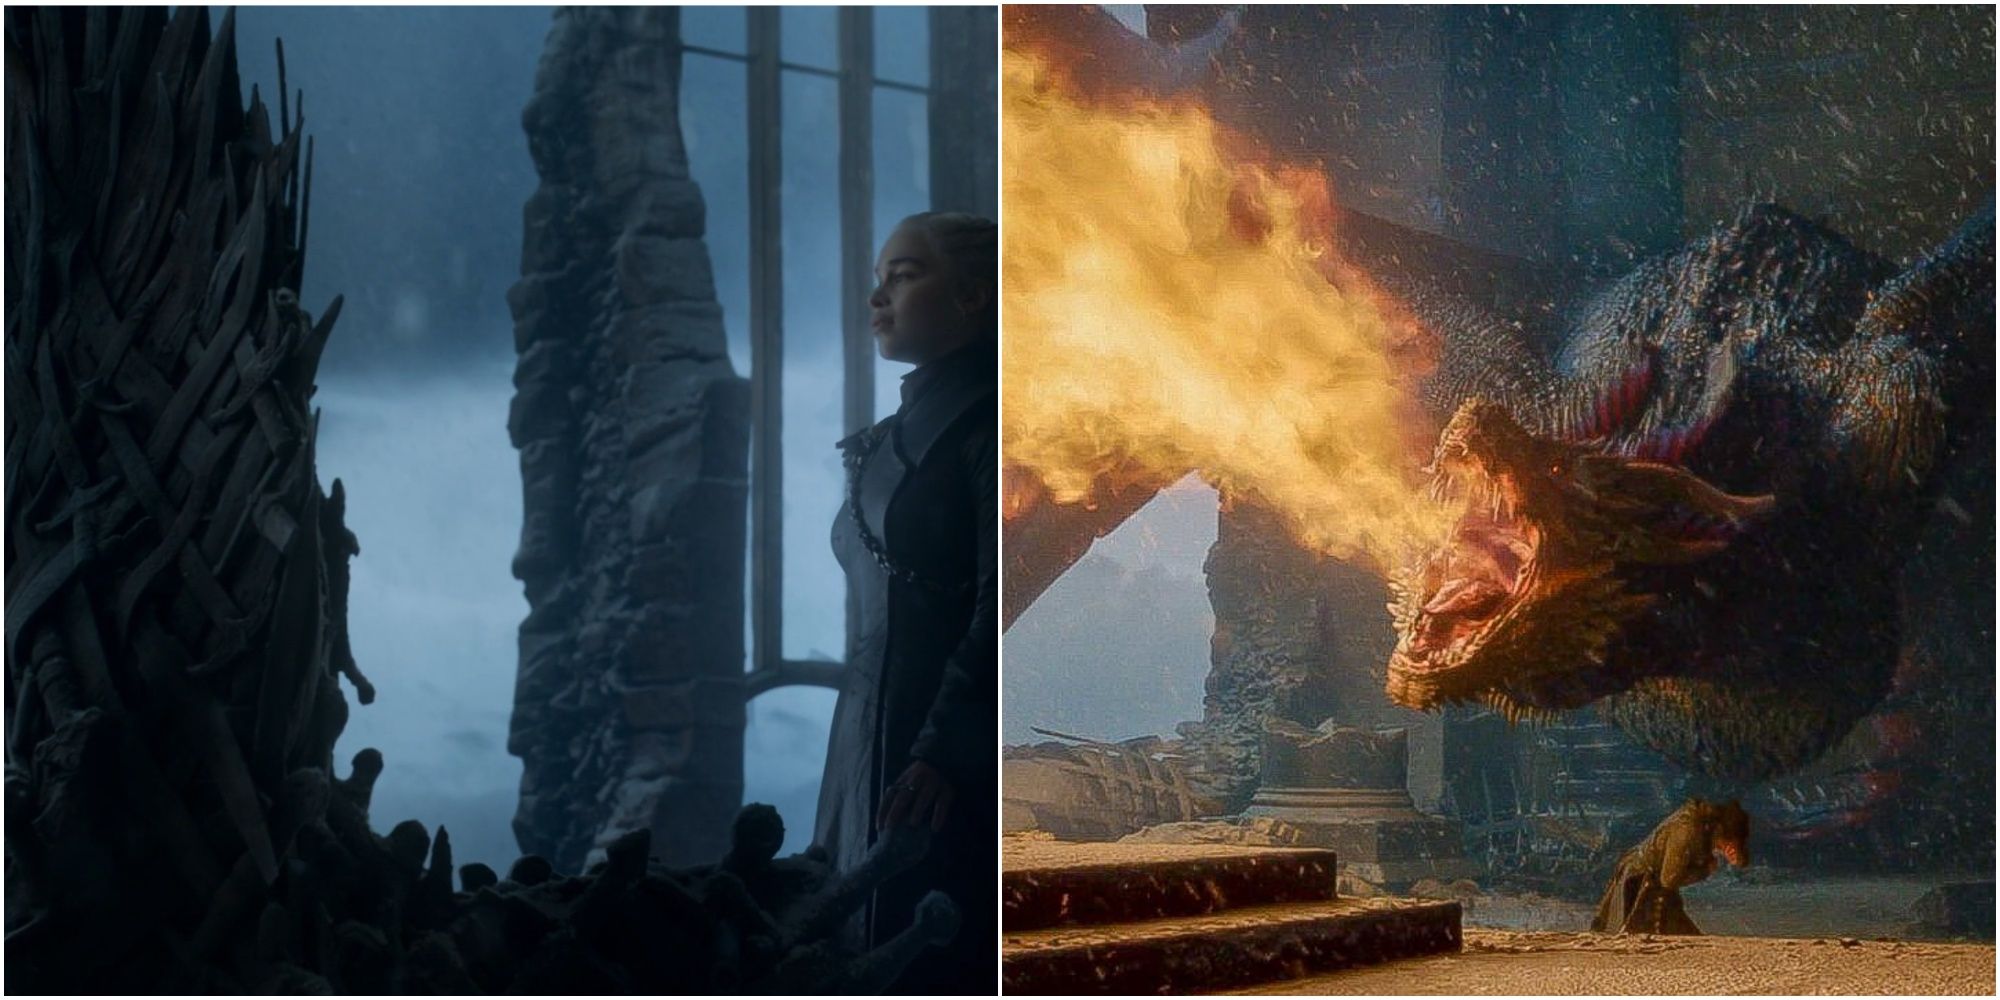 Split image of Daenerys Targaryen looking at the Iron Throne and Drogon breathing fire at the throne in Game of Thrones.